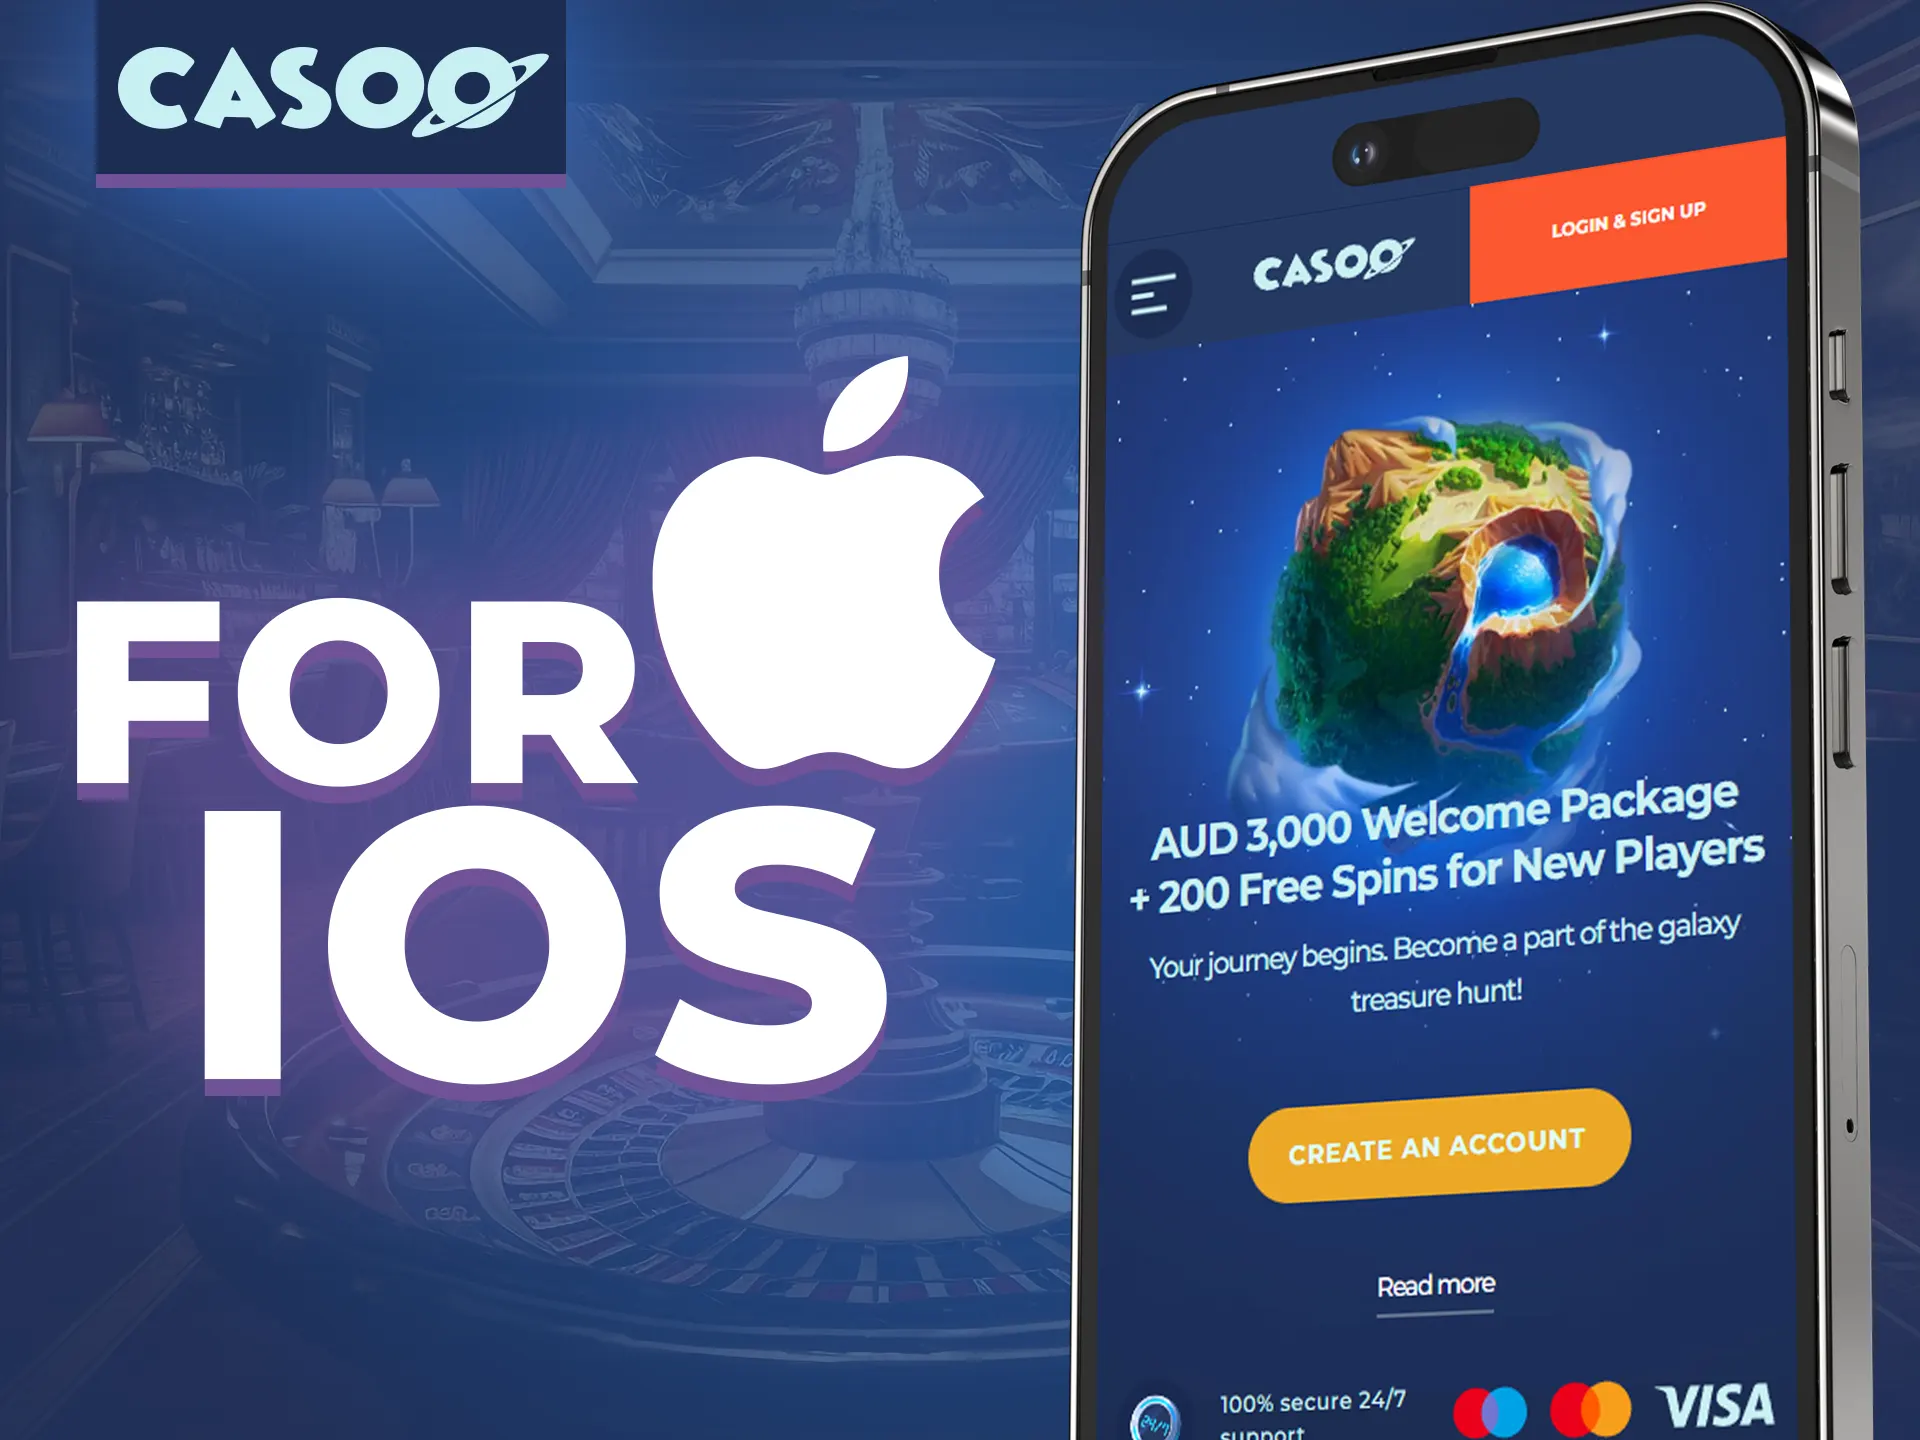 Mobile version of Casoo casino available on iOS devices.